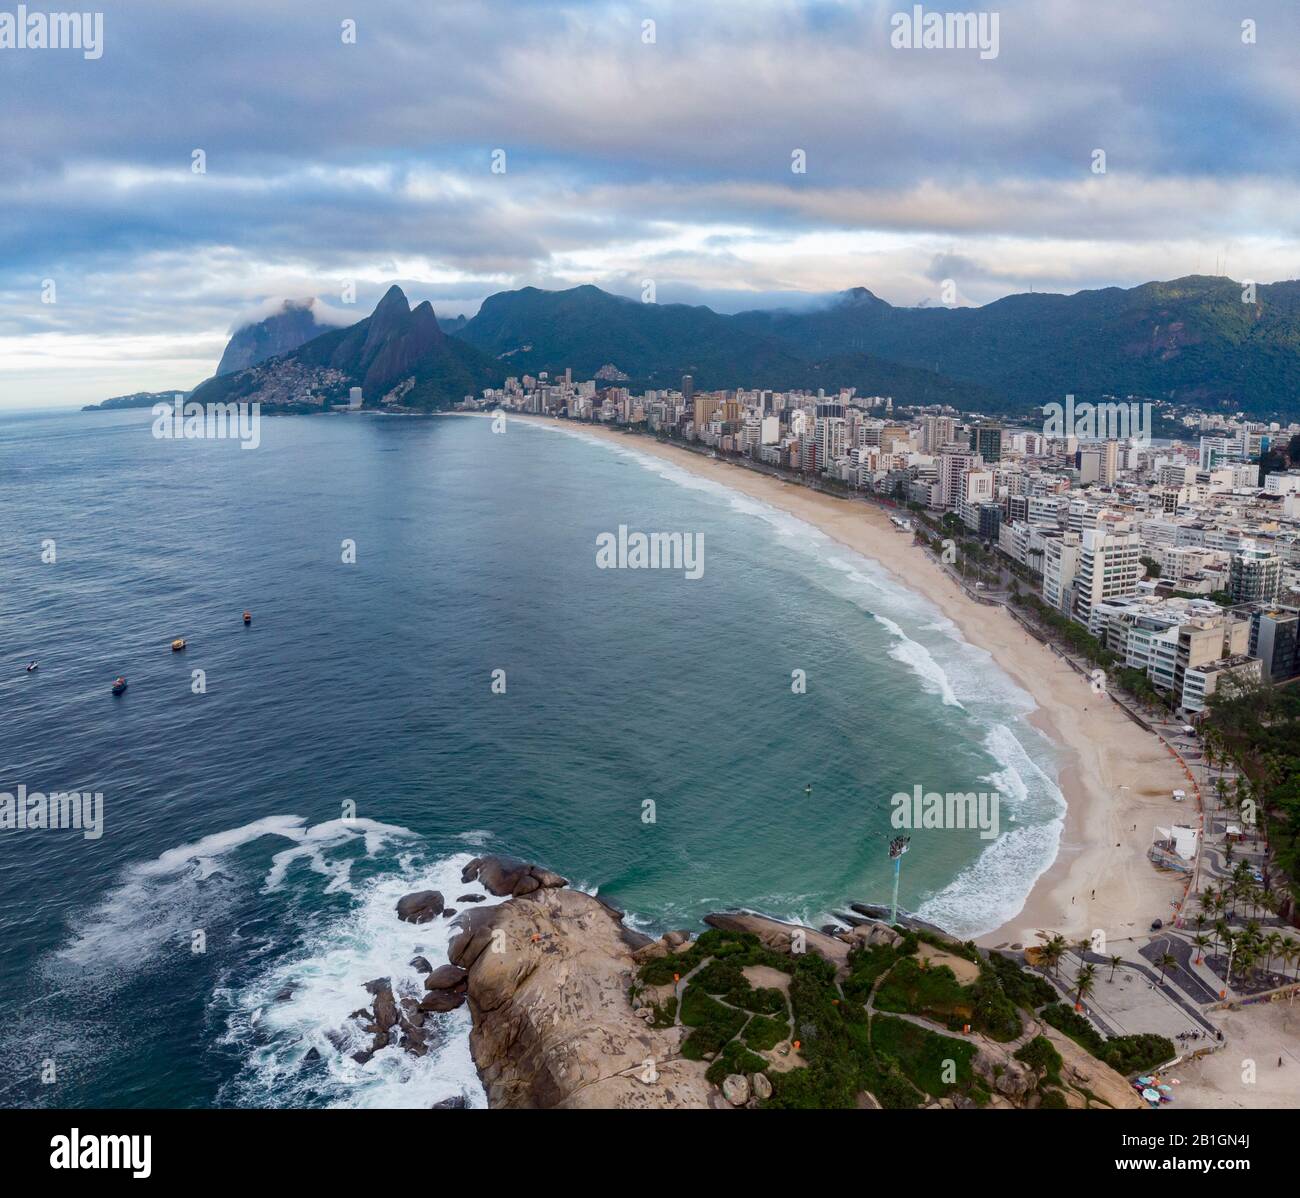 Arpoador rock in Rio de Janeiro with Ipanema beach in the foreground and wider cityscape including Two Brothers mountain in the background Stock Photo